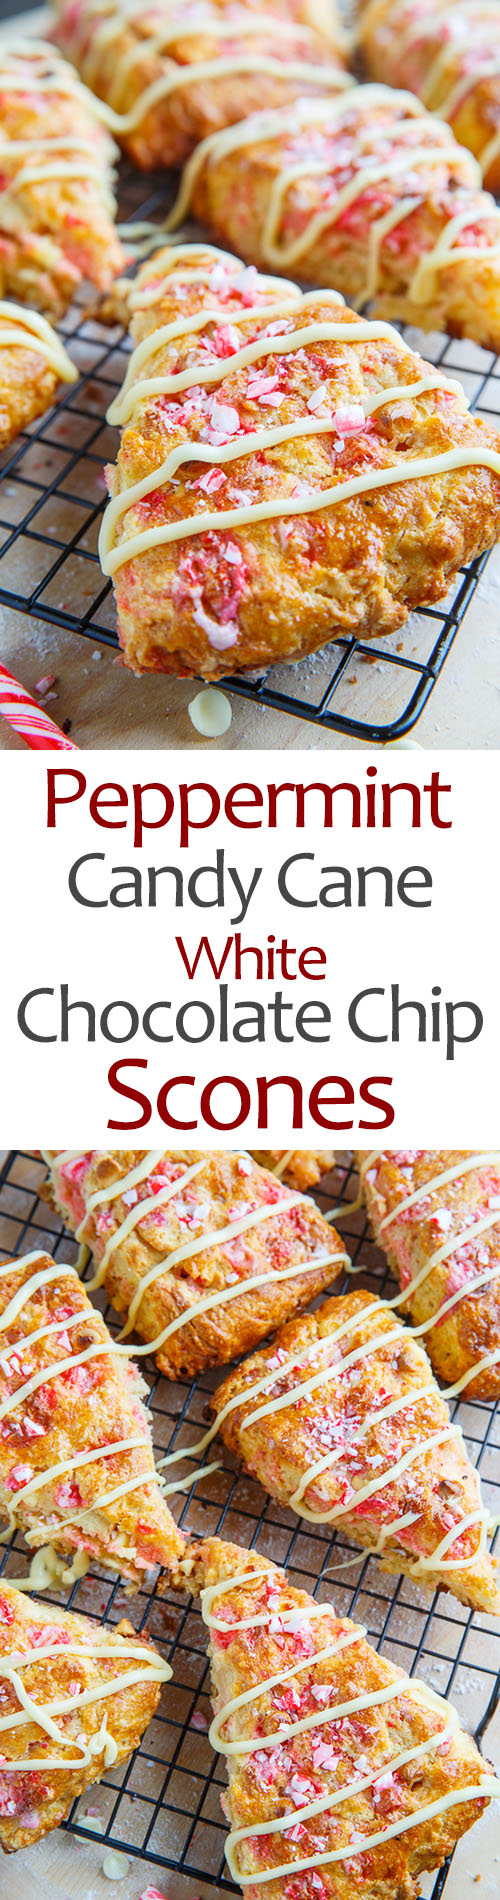 Peppermint Candy Cane and White Chocolate Chip Scones